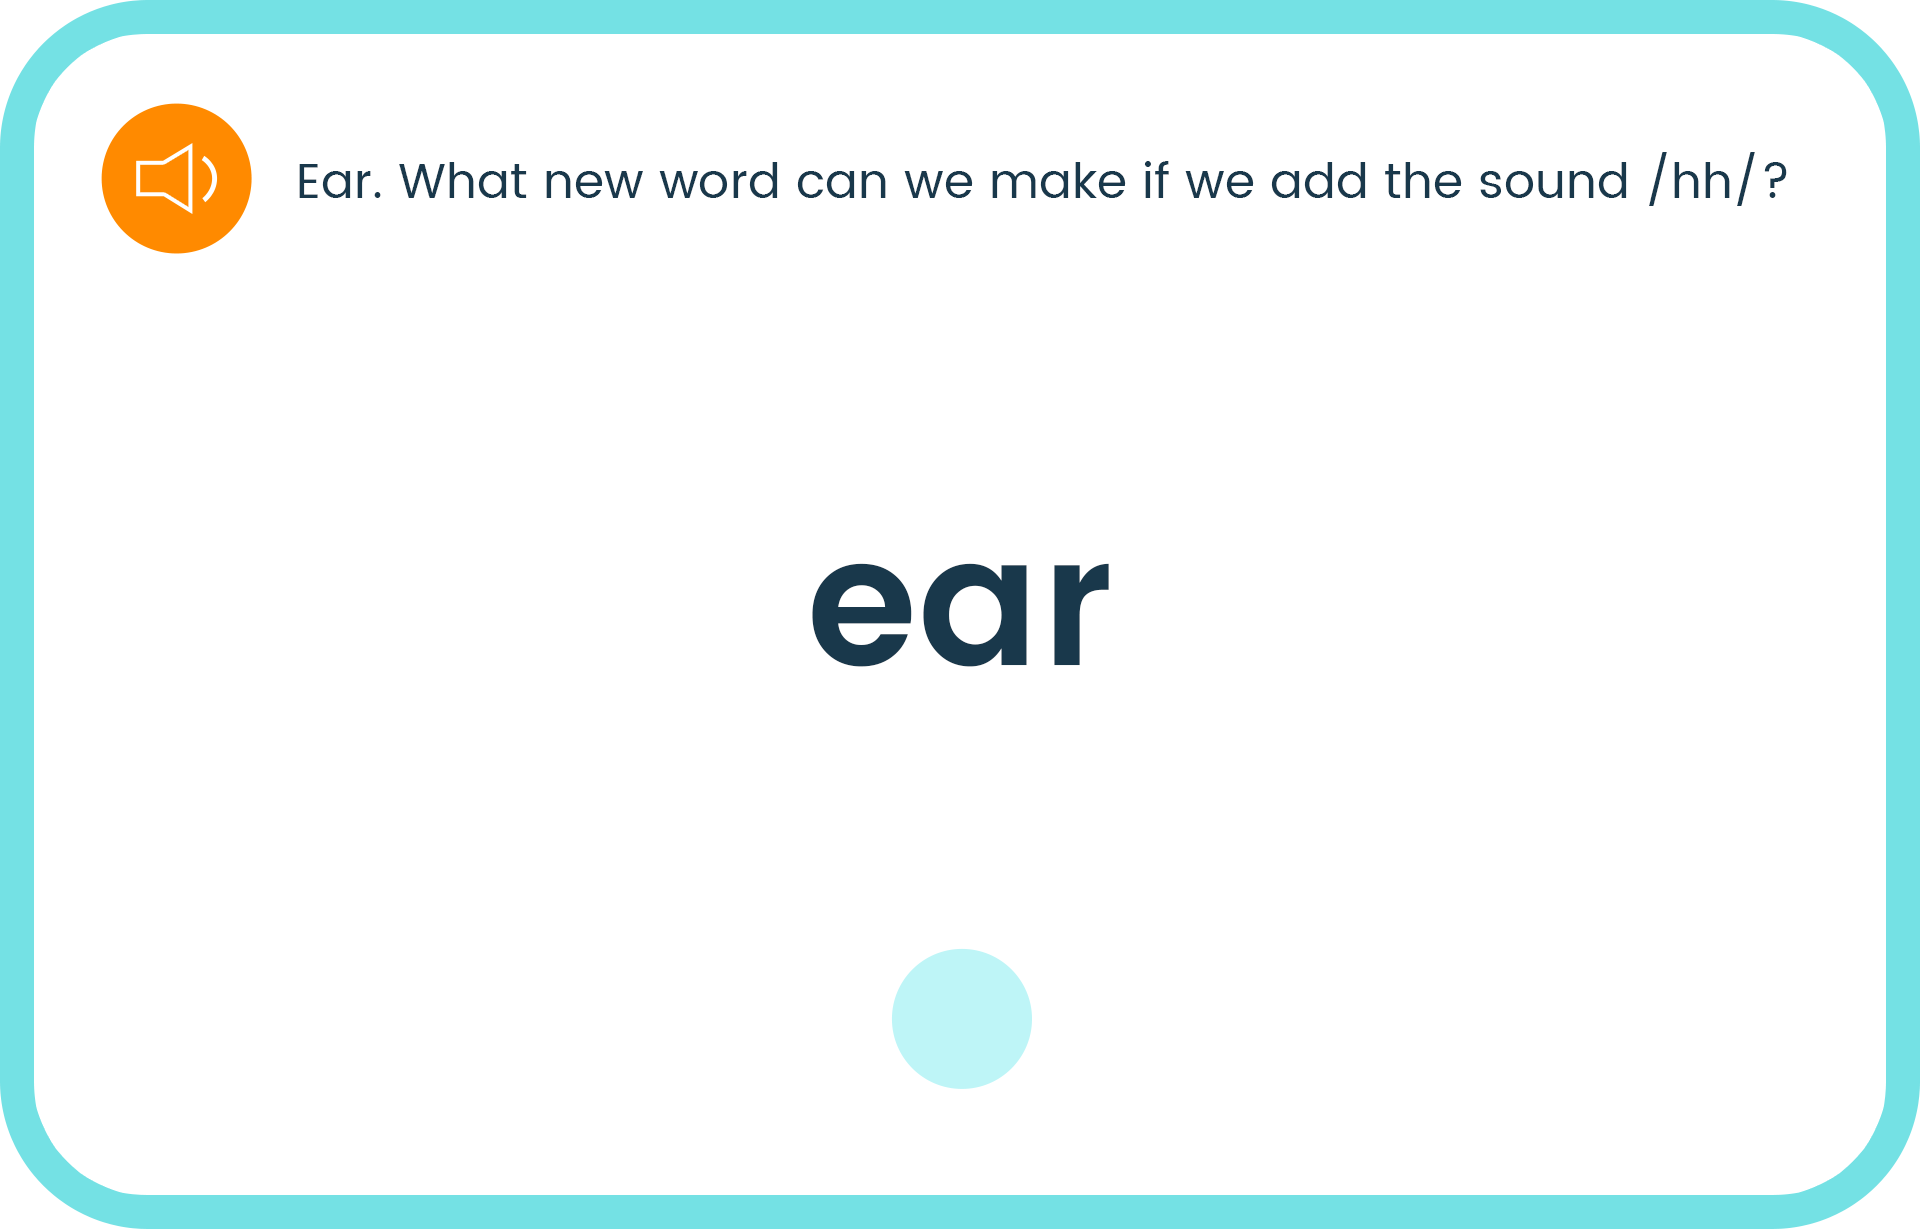 An example of a voice-enabled phoneme manipulation exercise.